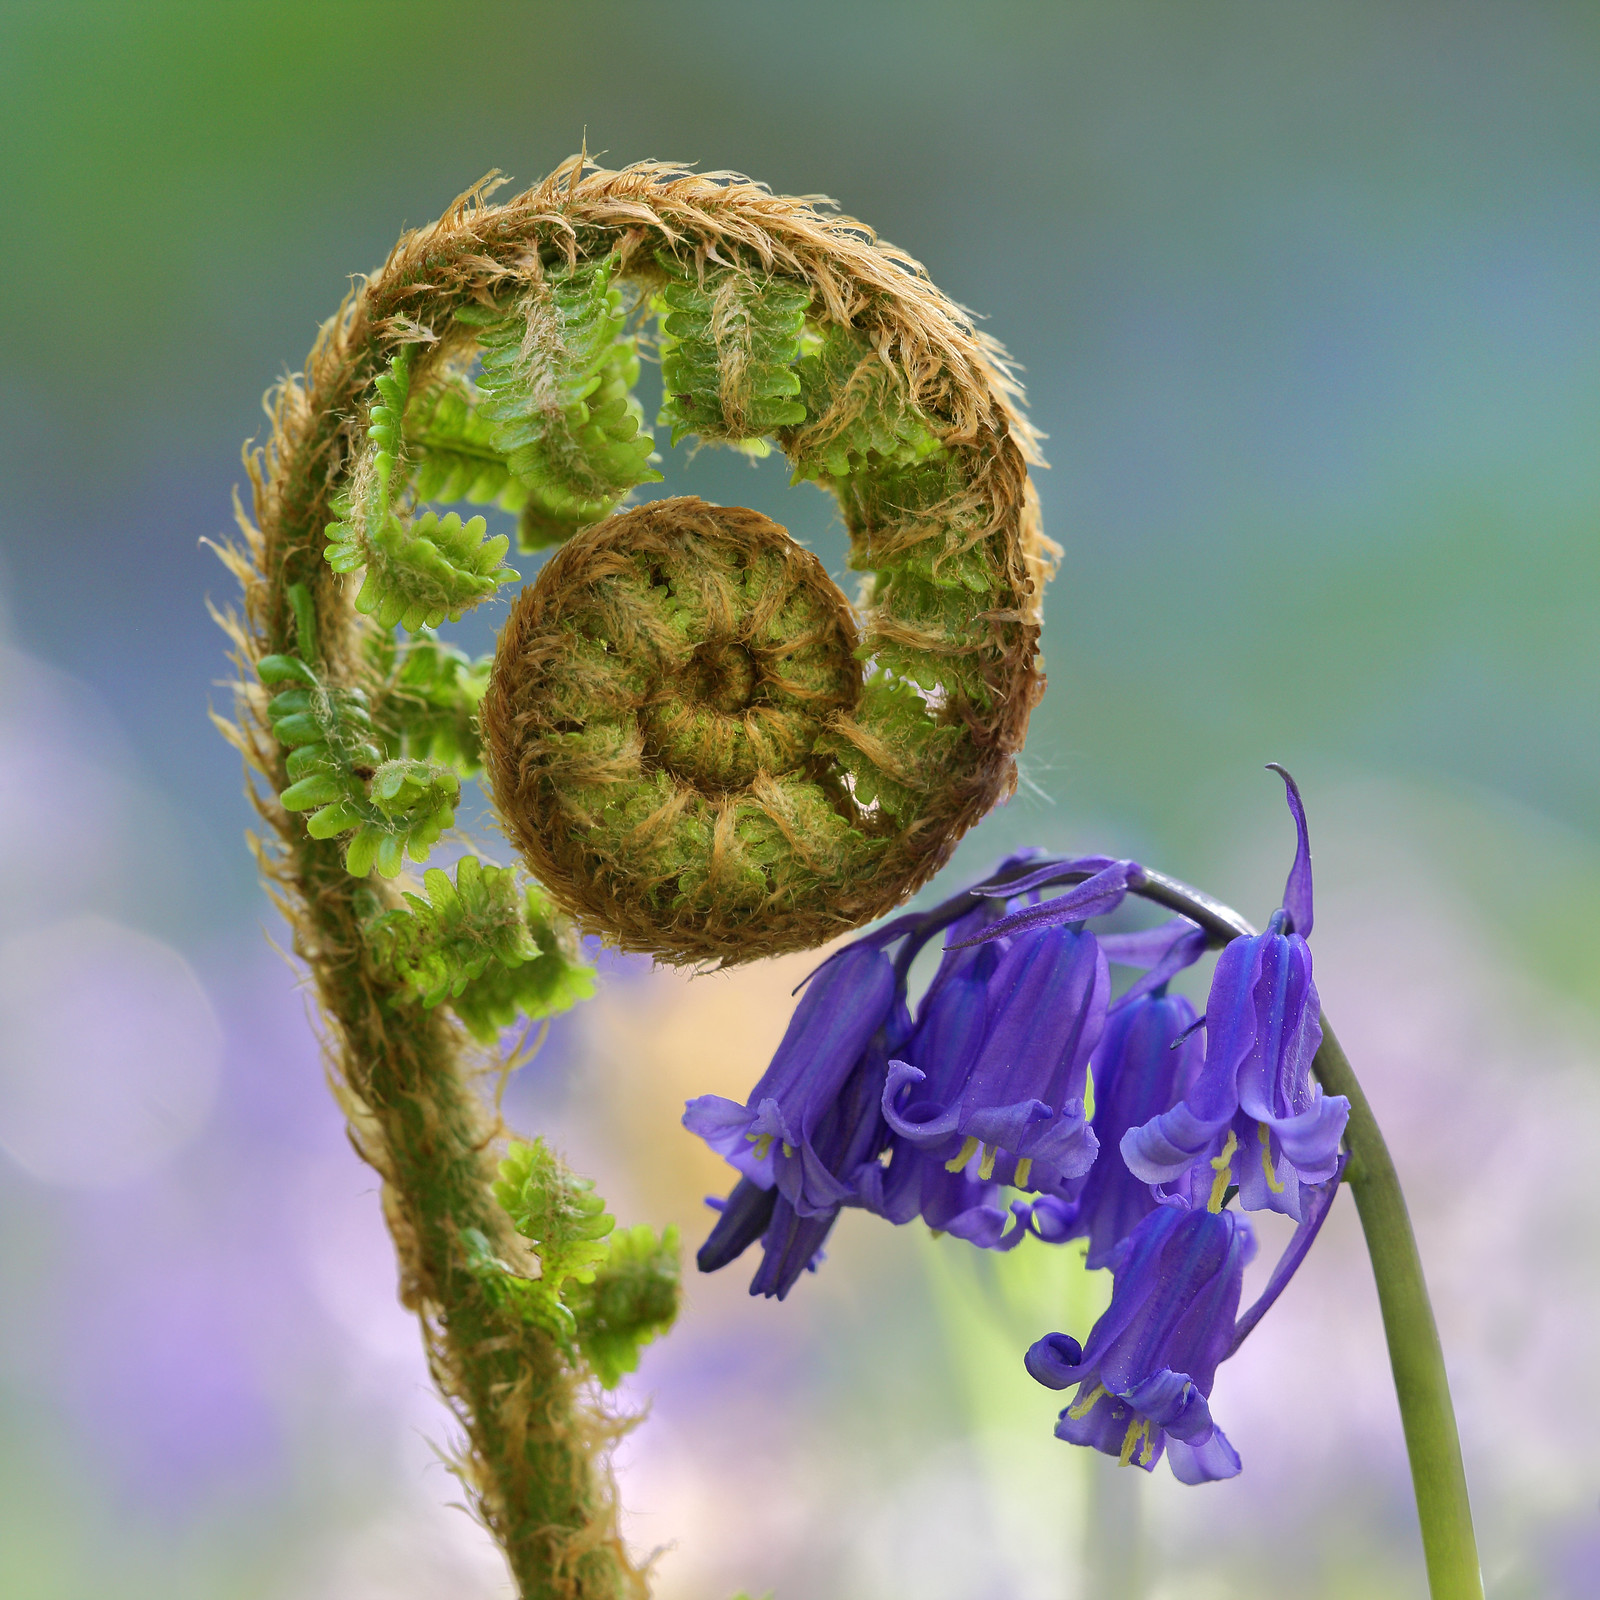 Uncoiling fern and bluebells